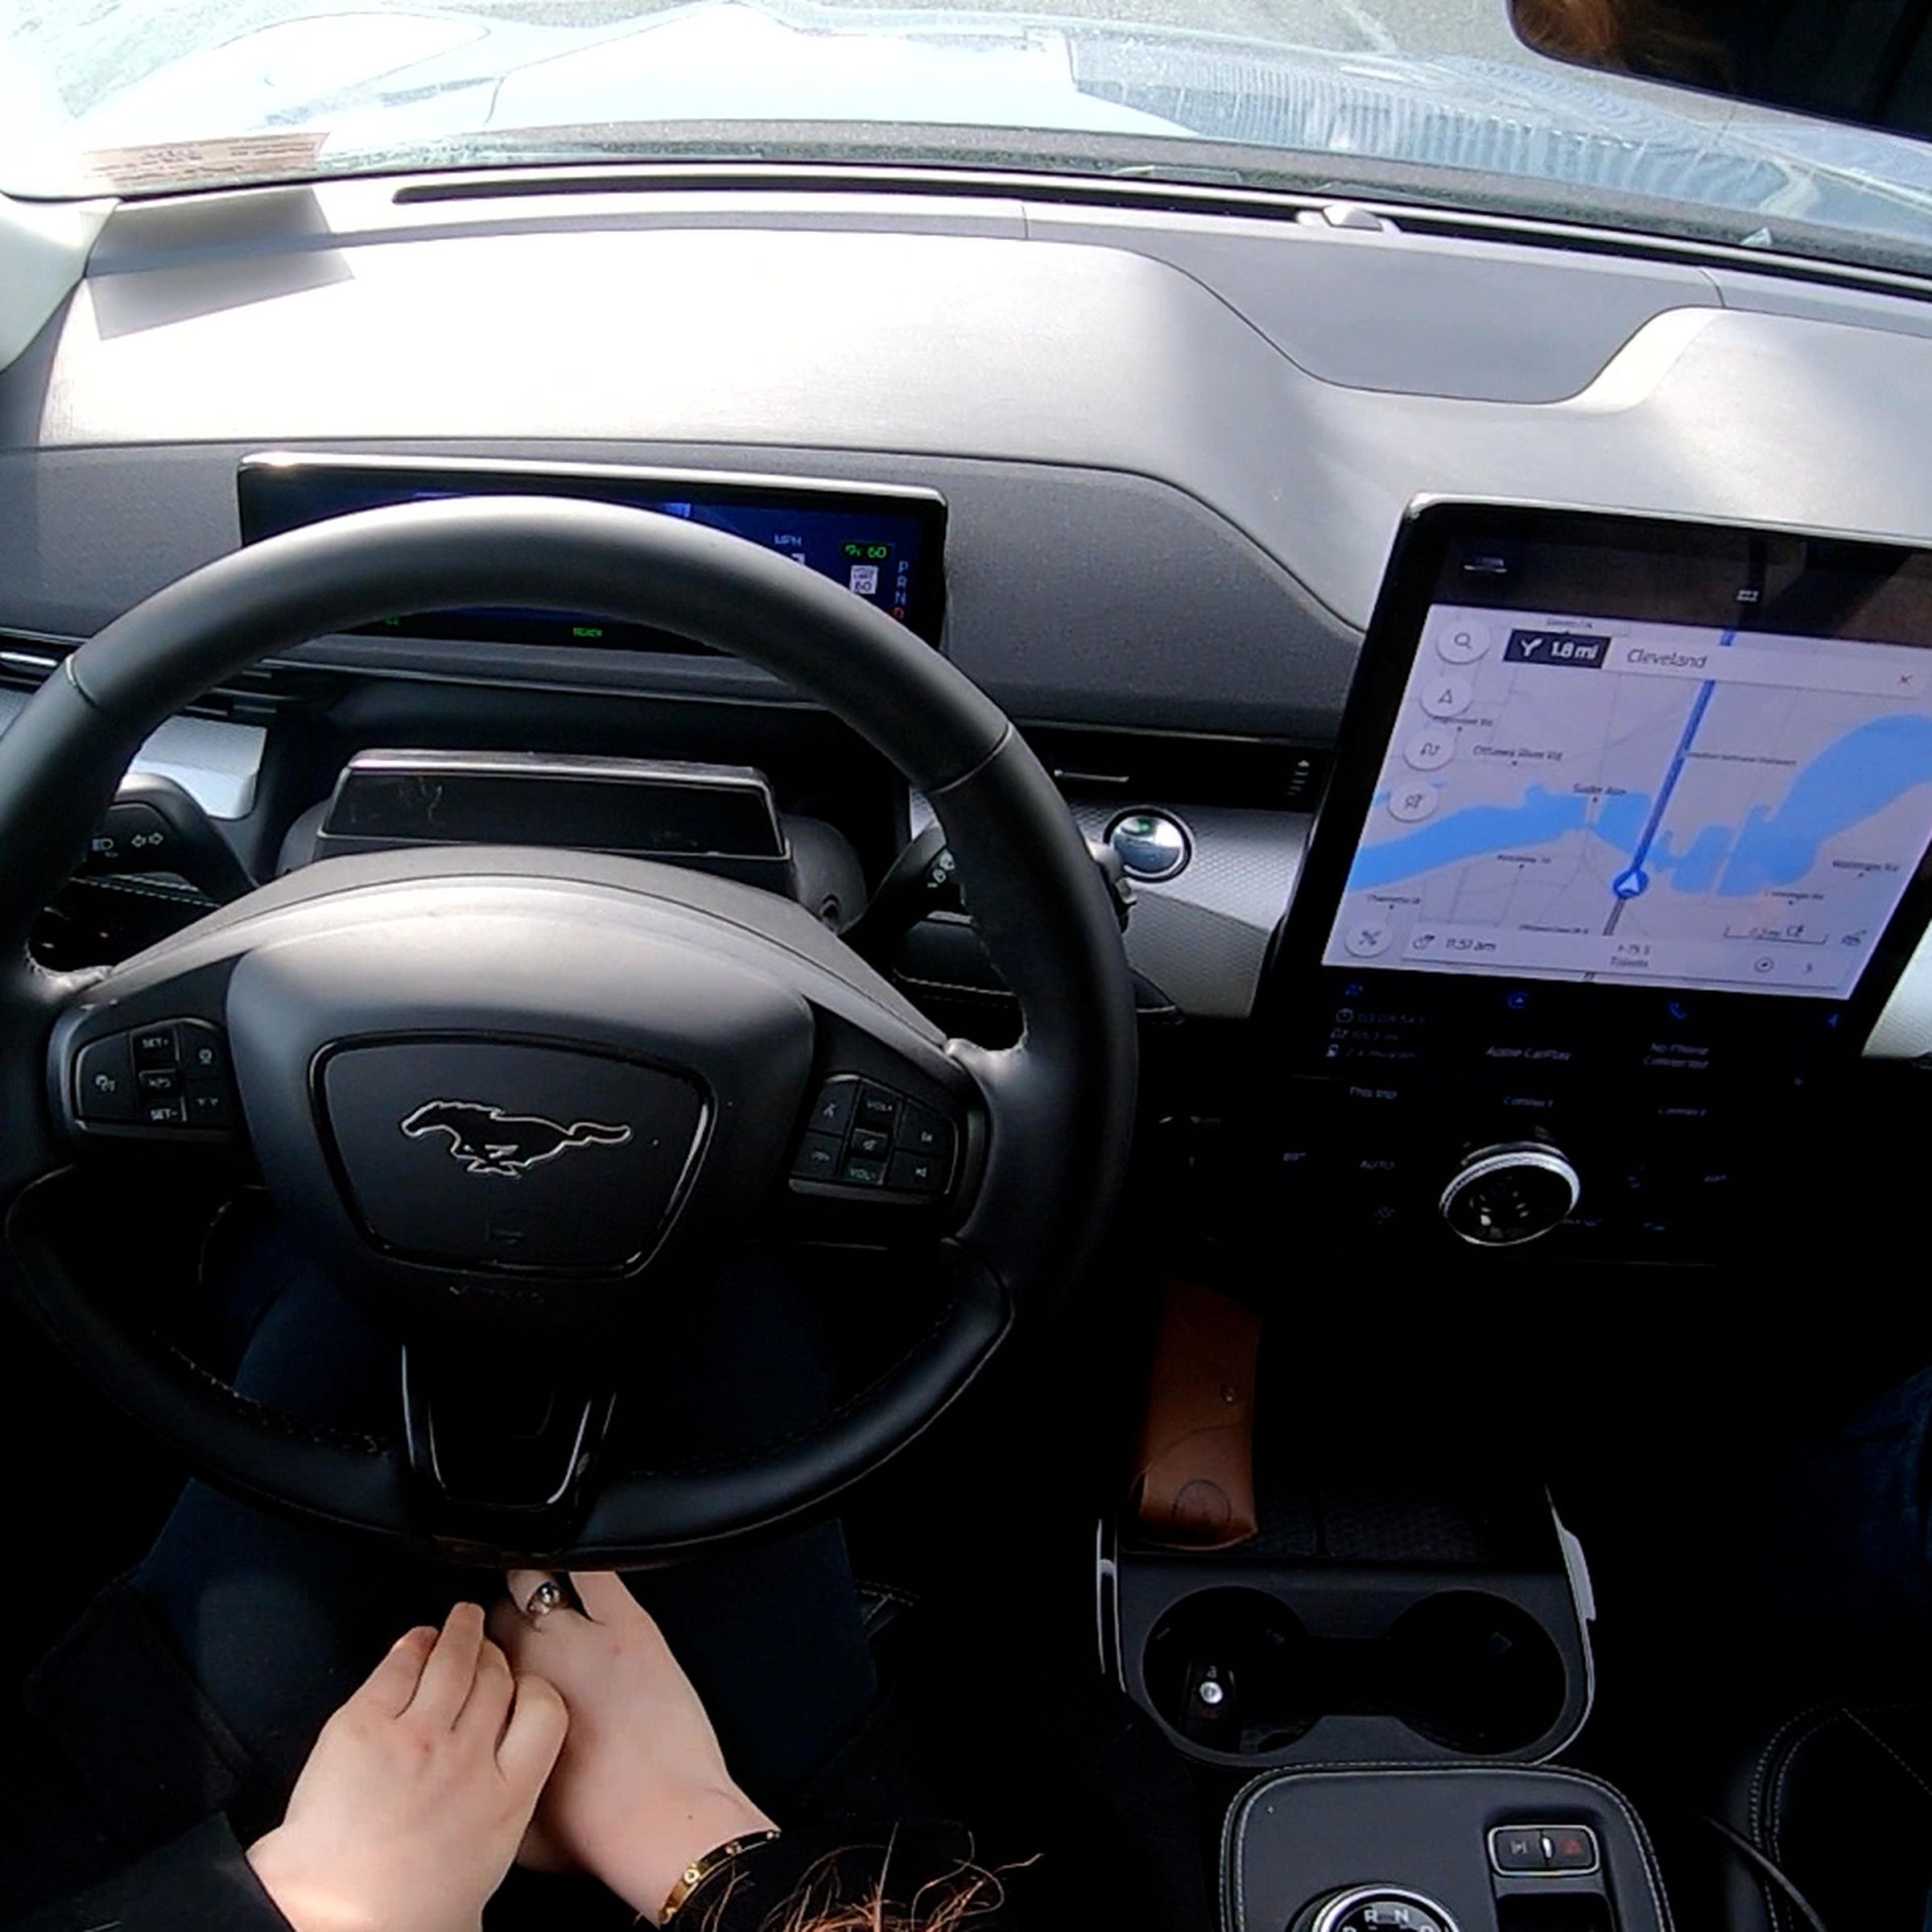 Ford’s BlueCruise hands-free driver assist